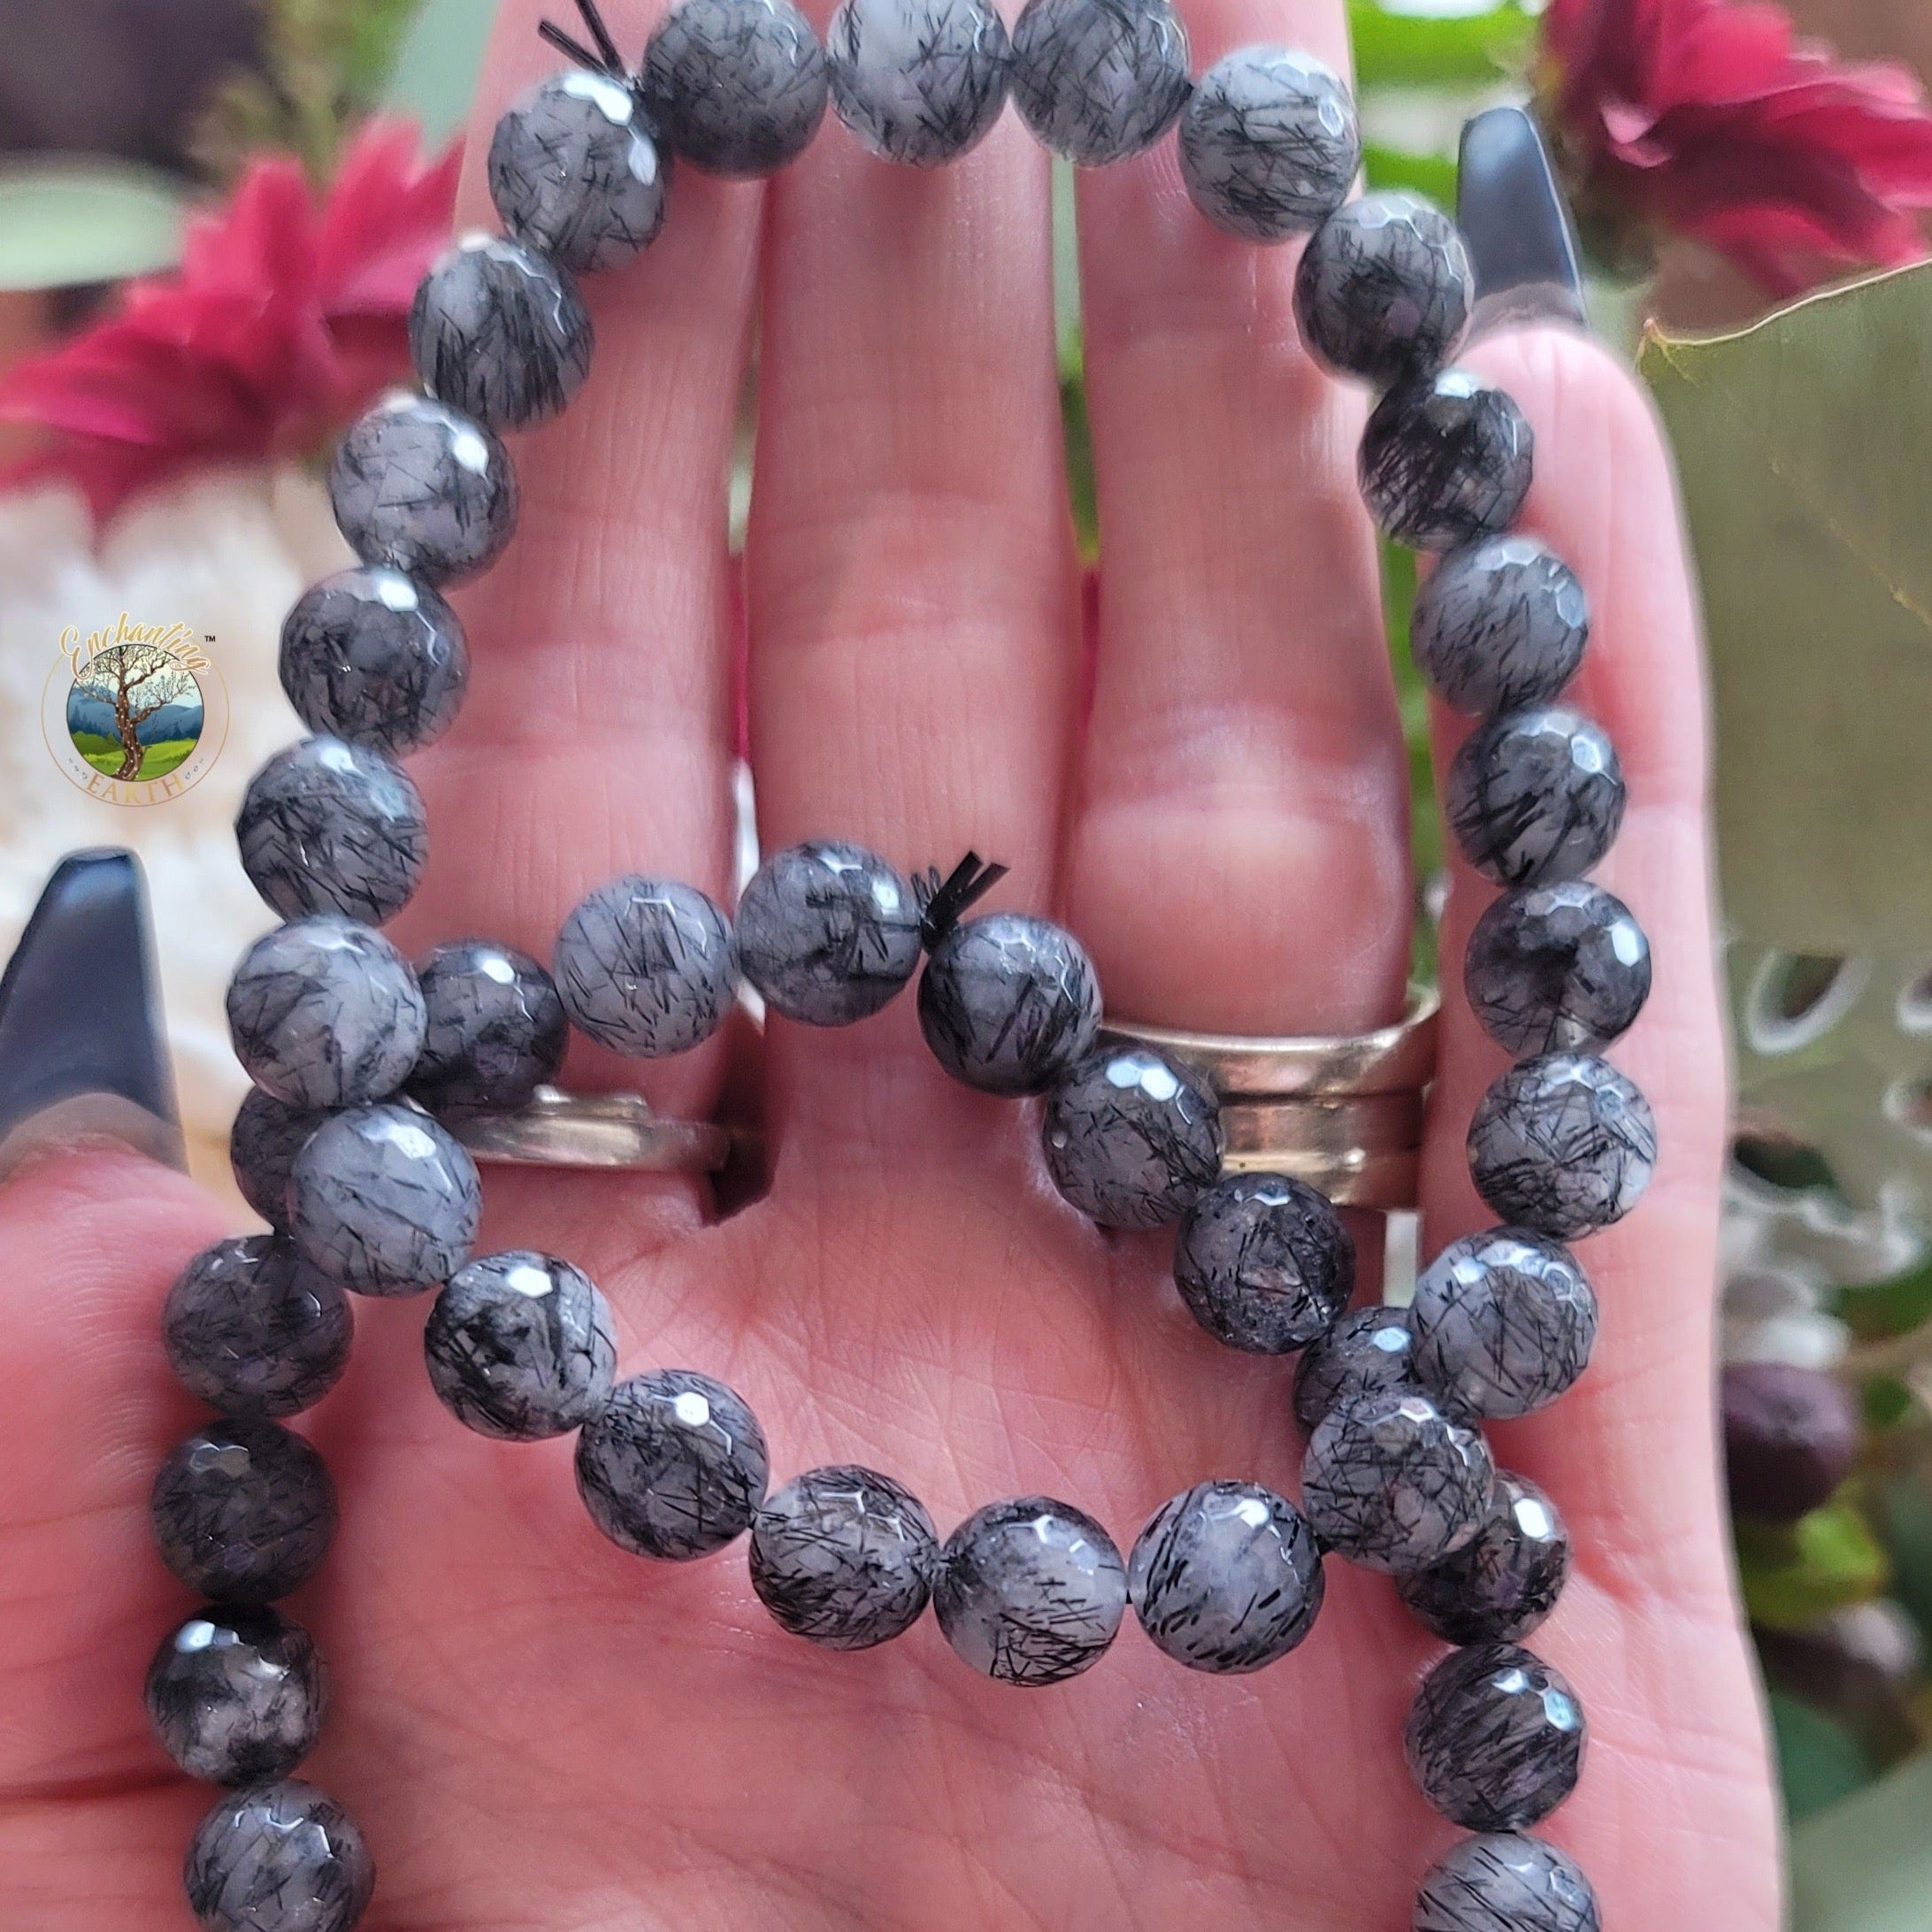 Black Tourmaline Rutile Faceted Bracelet for Protection and Purification